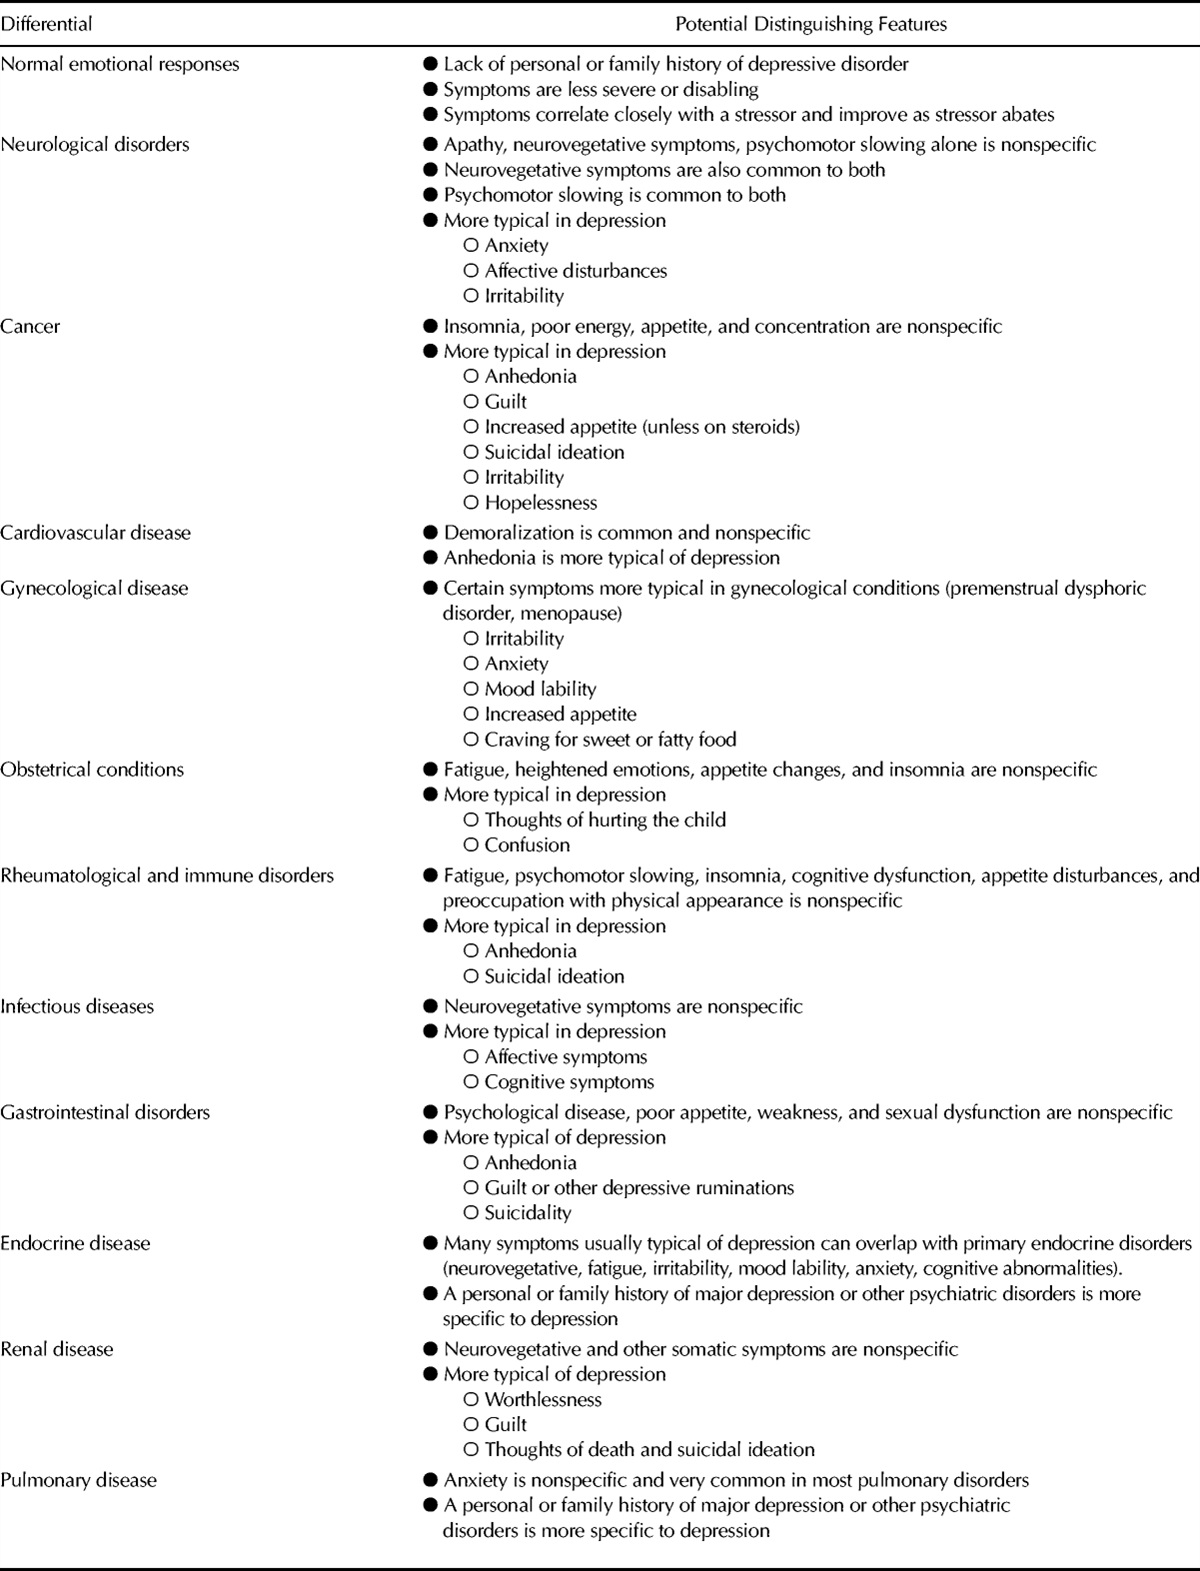 Major Depressive Disorder in Medical Illness: A Review of Assessment, Prevalence, and Treatment Options